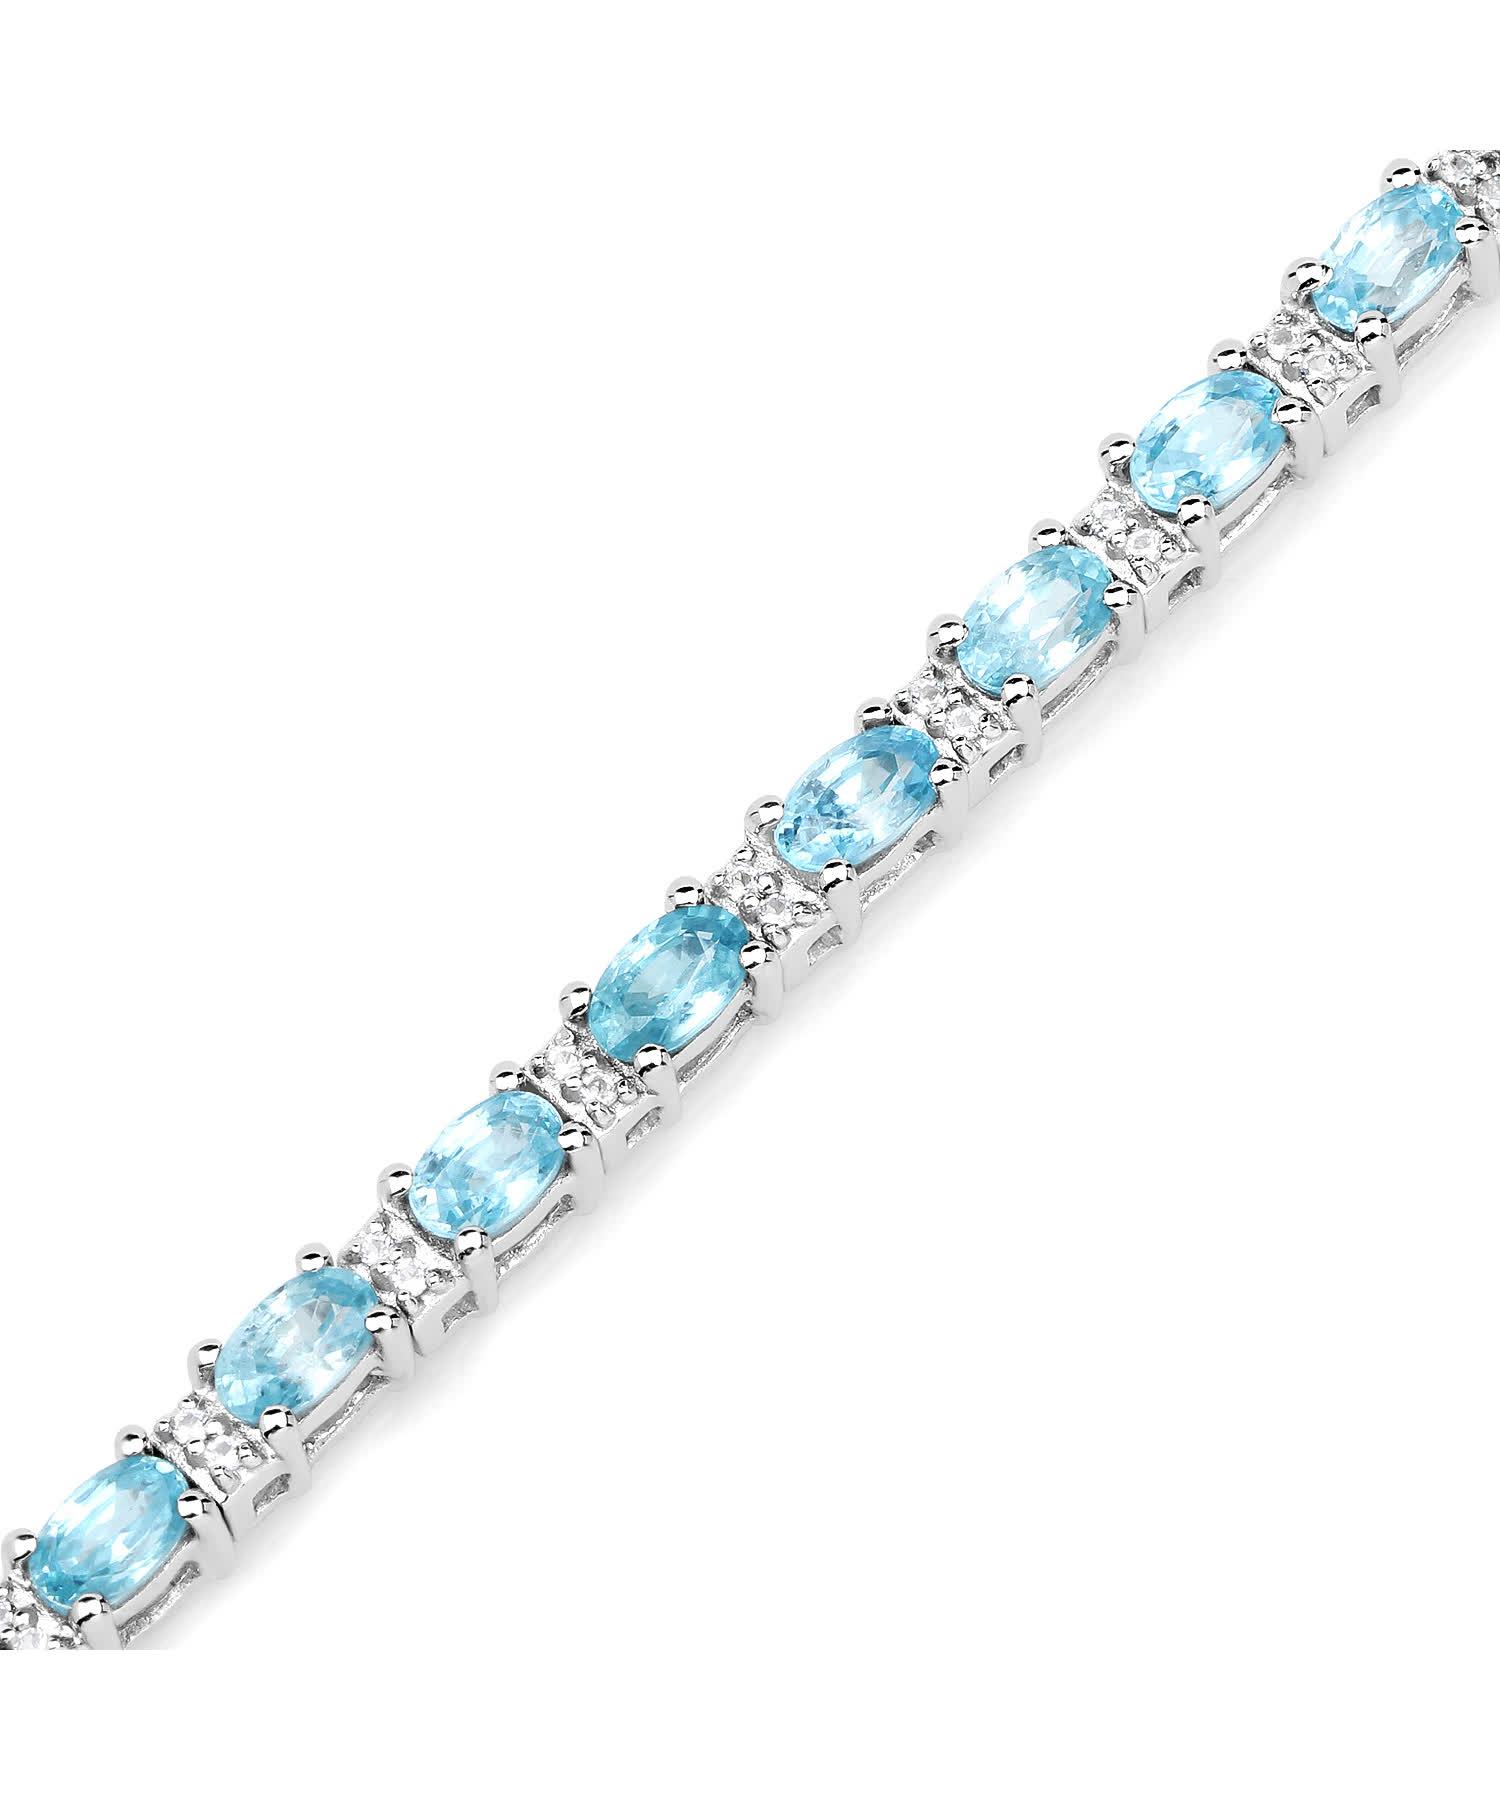 8.84ctw Natural Zircon and Topaz Rhodium Plated 925 Sterling Silver Tennis Bracelet View 3